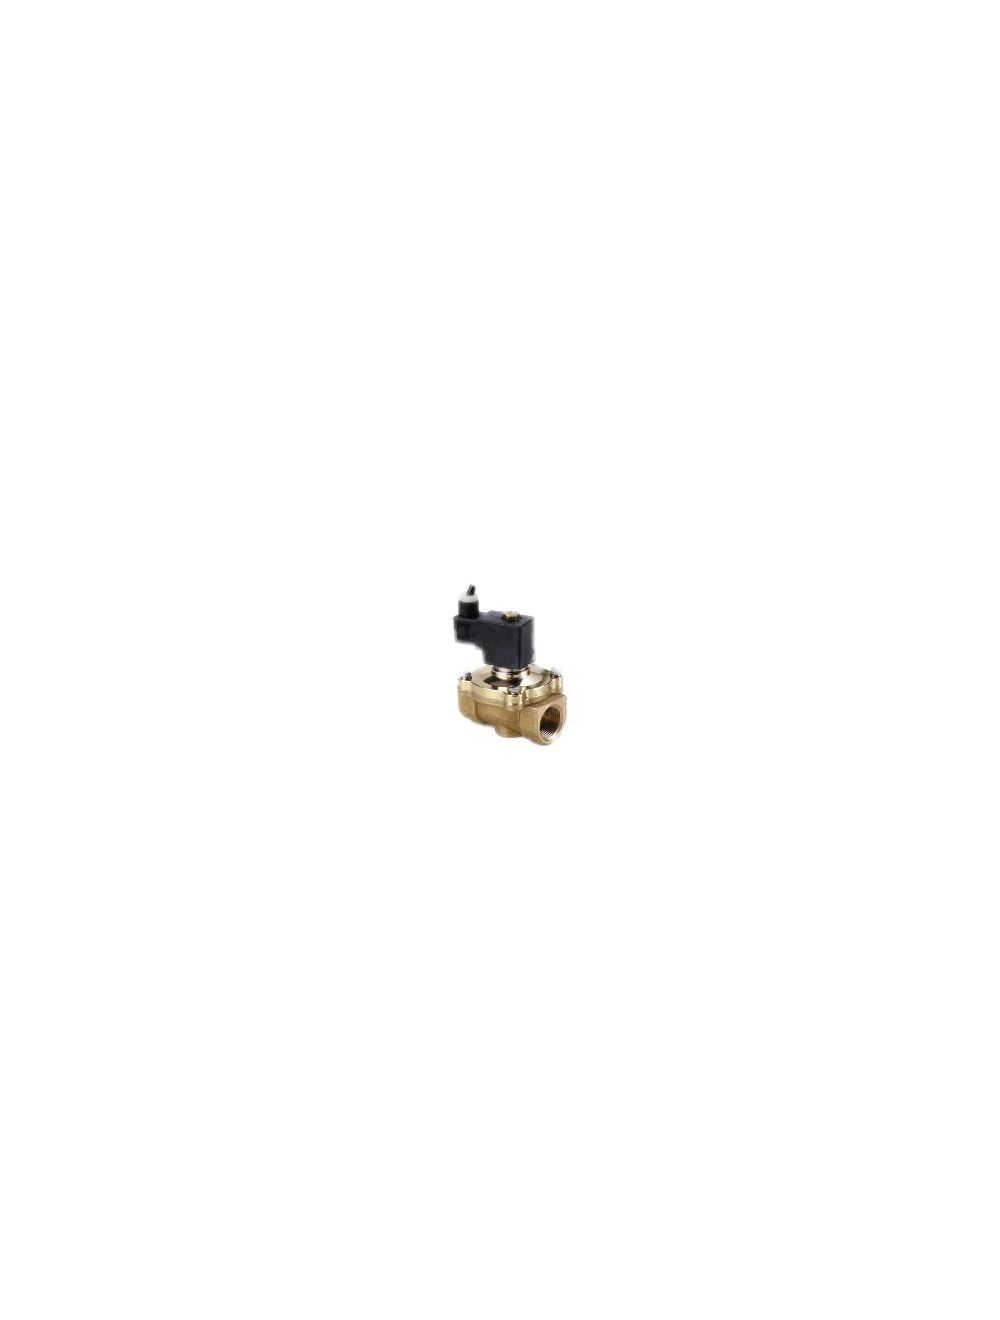 New In stock for sale, UNID Solenoid Valve PKW-40